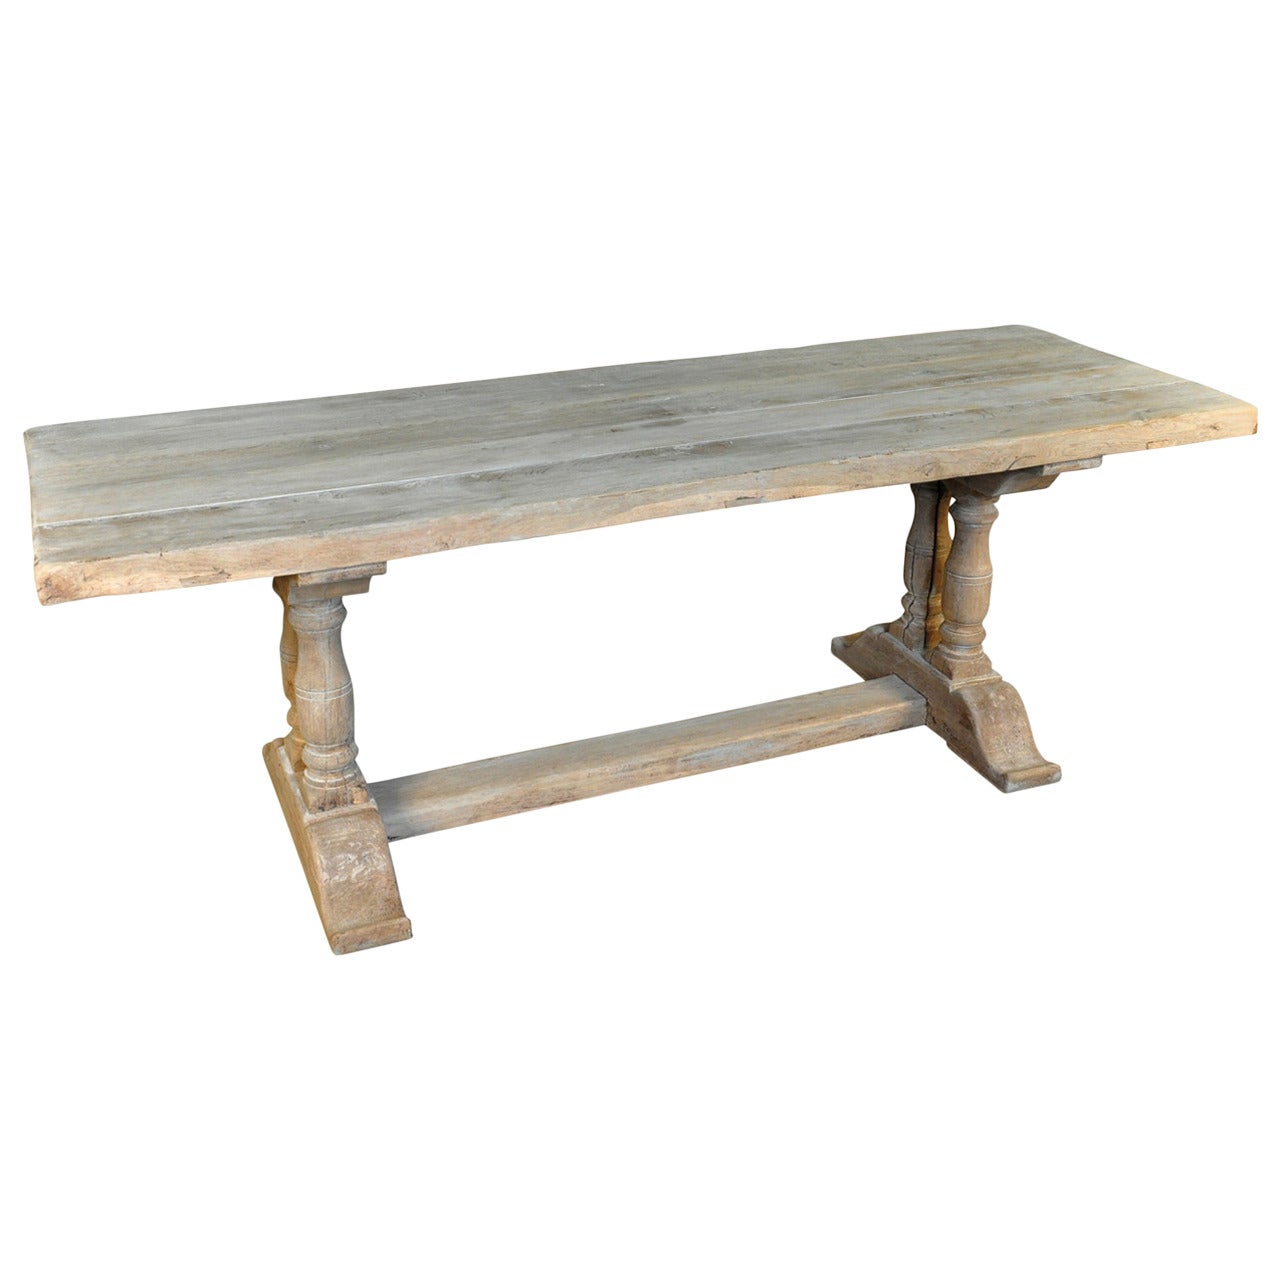 French 19th Century Farm or Trestle Table In Bleached Oak